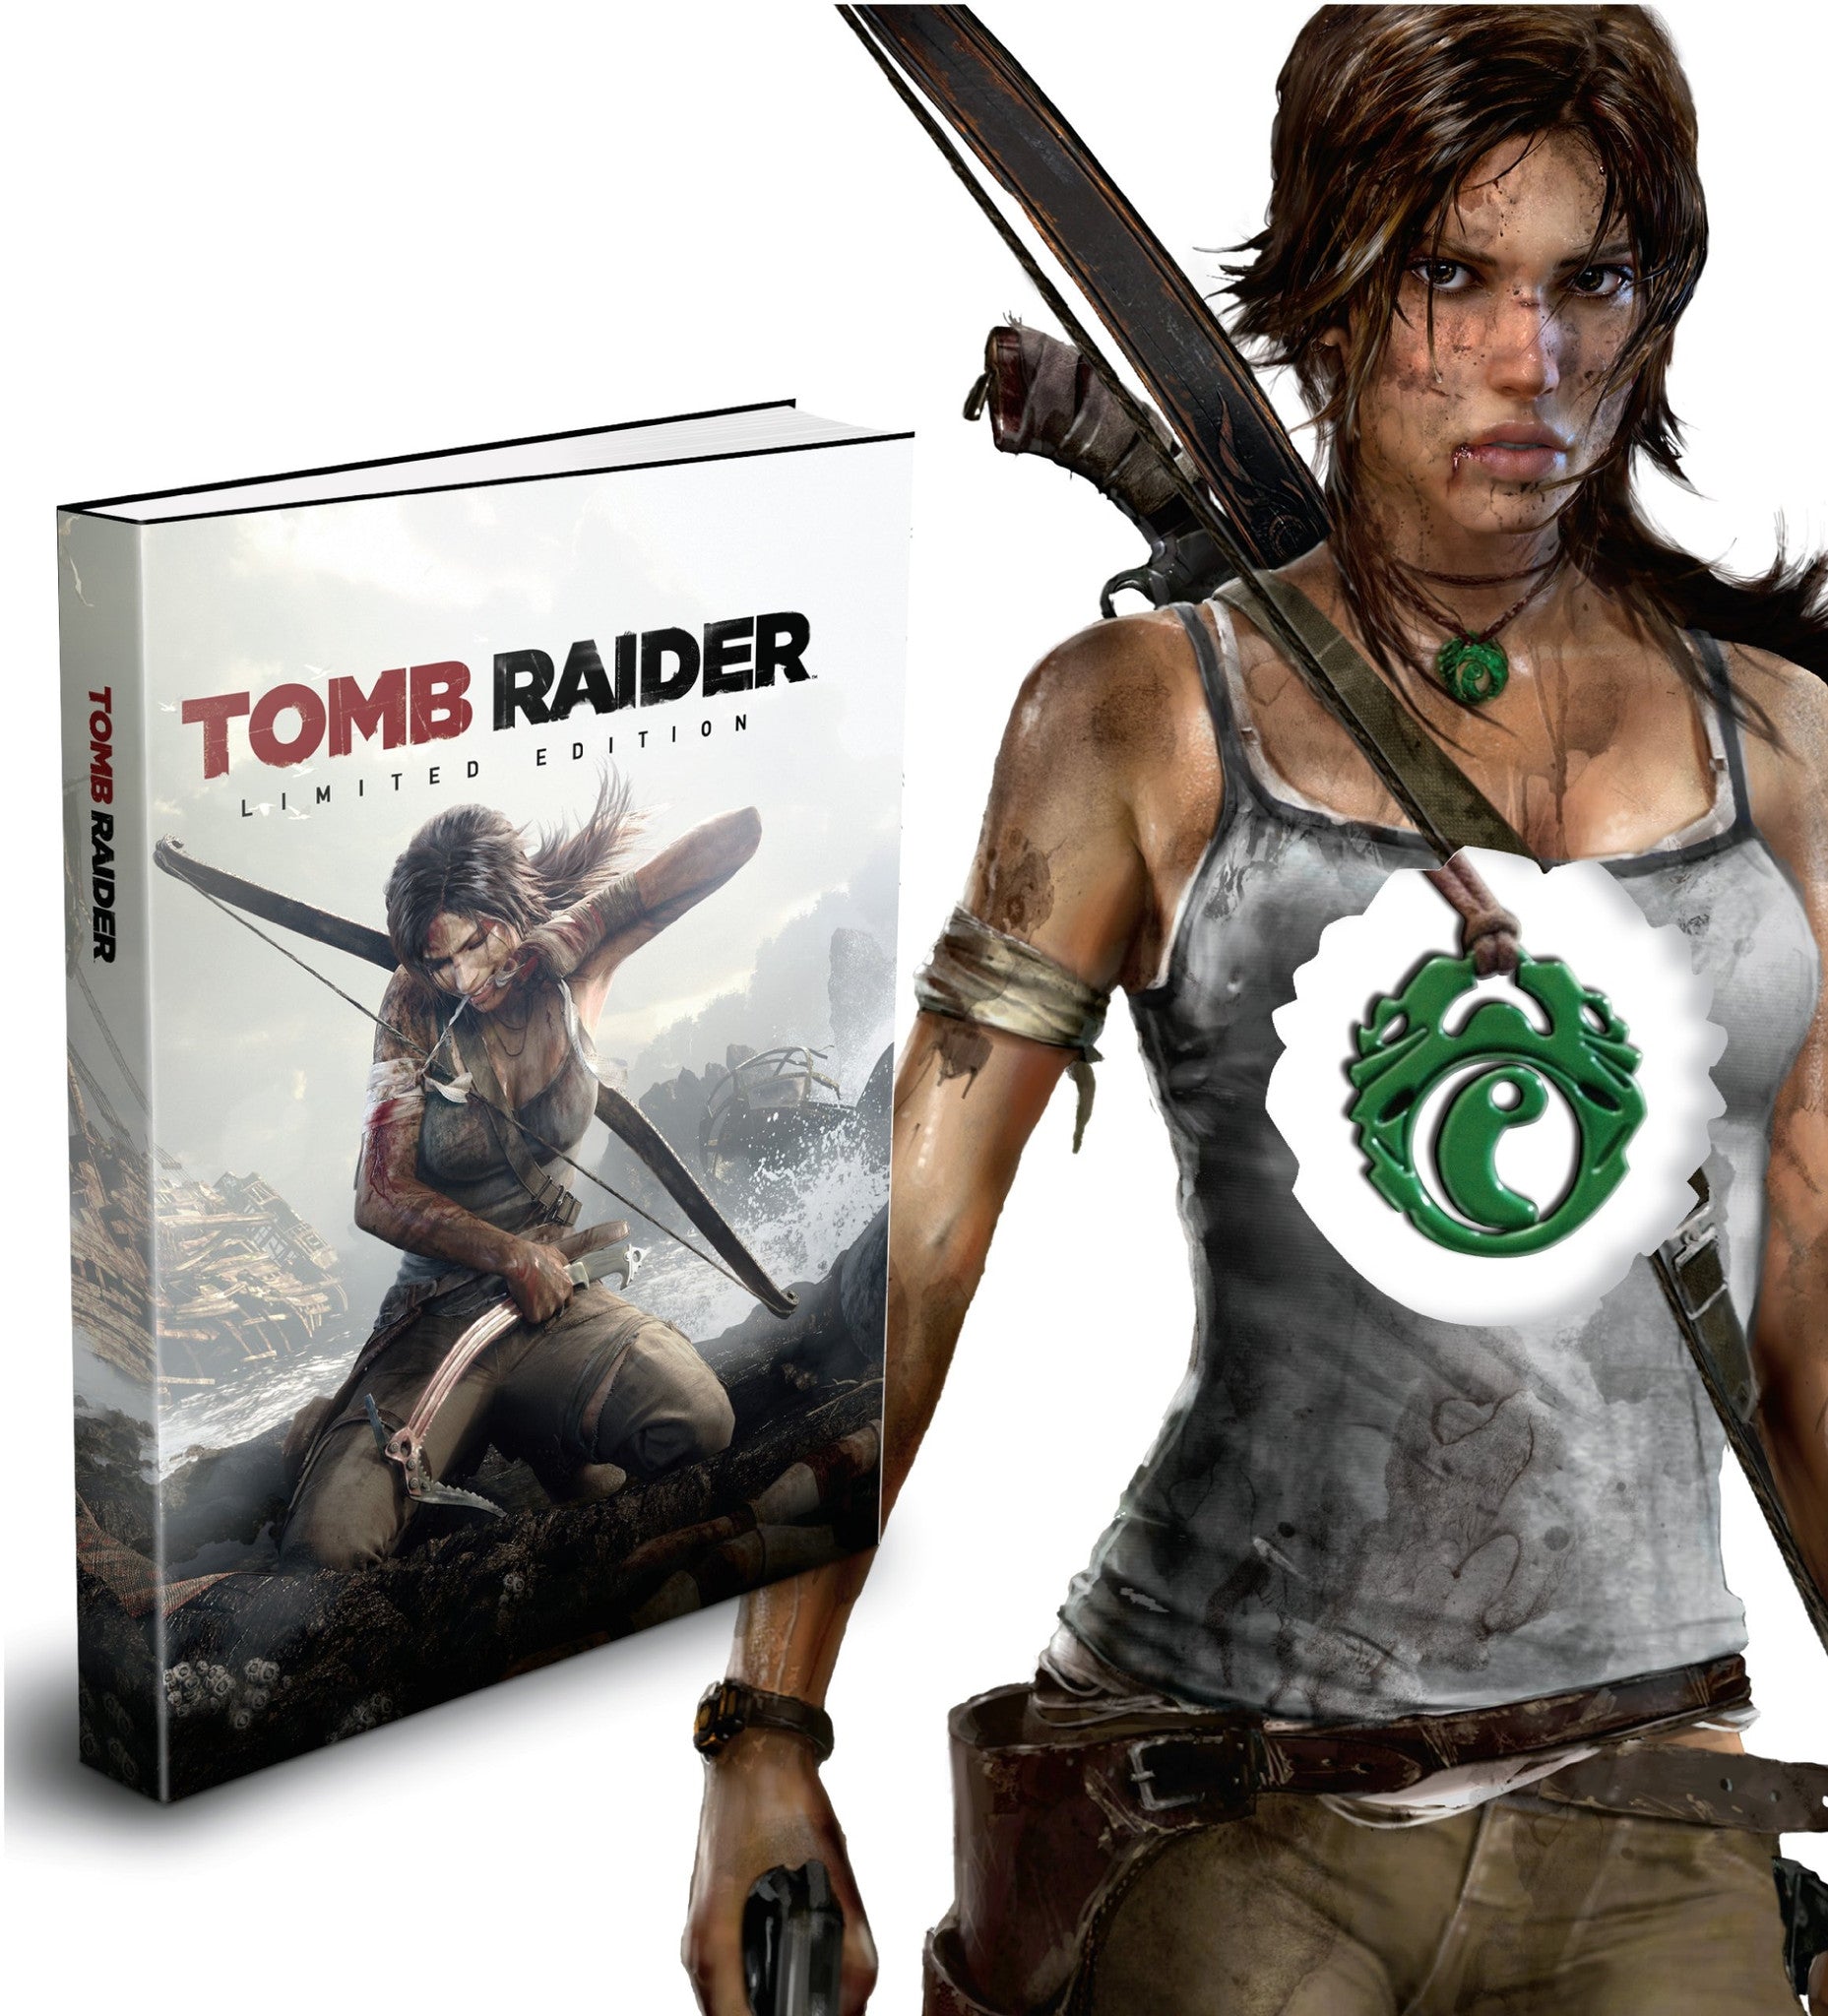 Tomb Raider Limited Edition Strategy Guide Hardcover